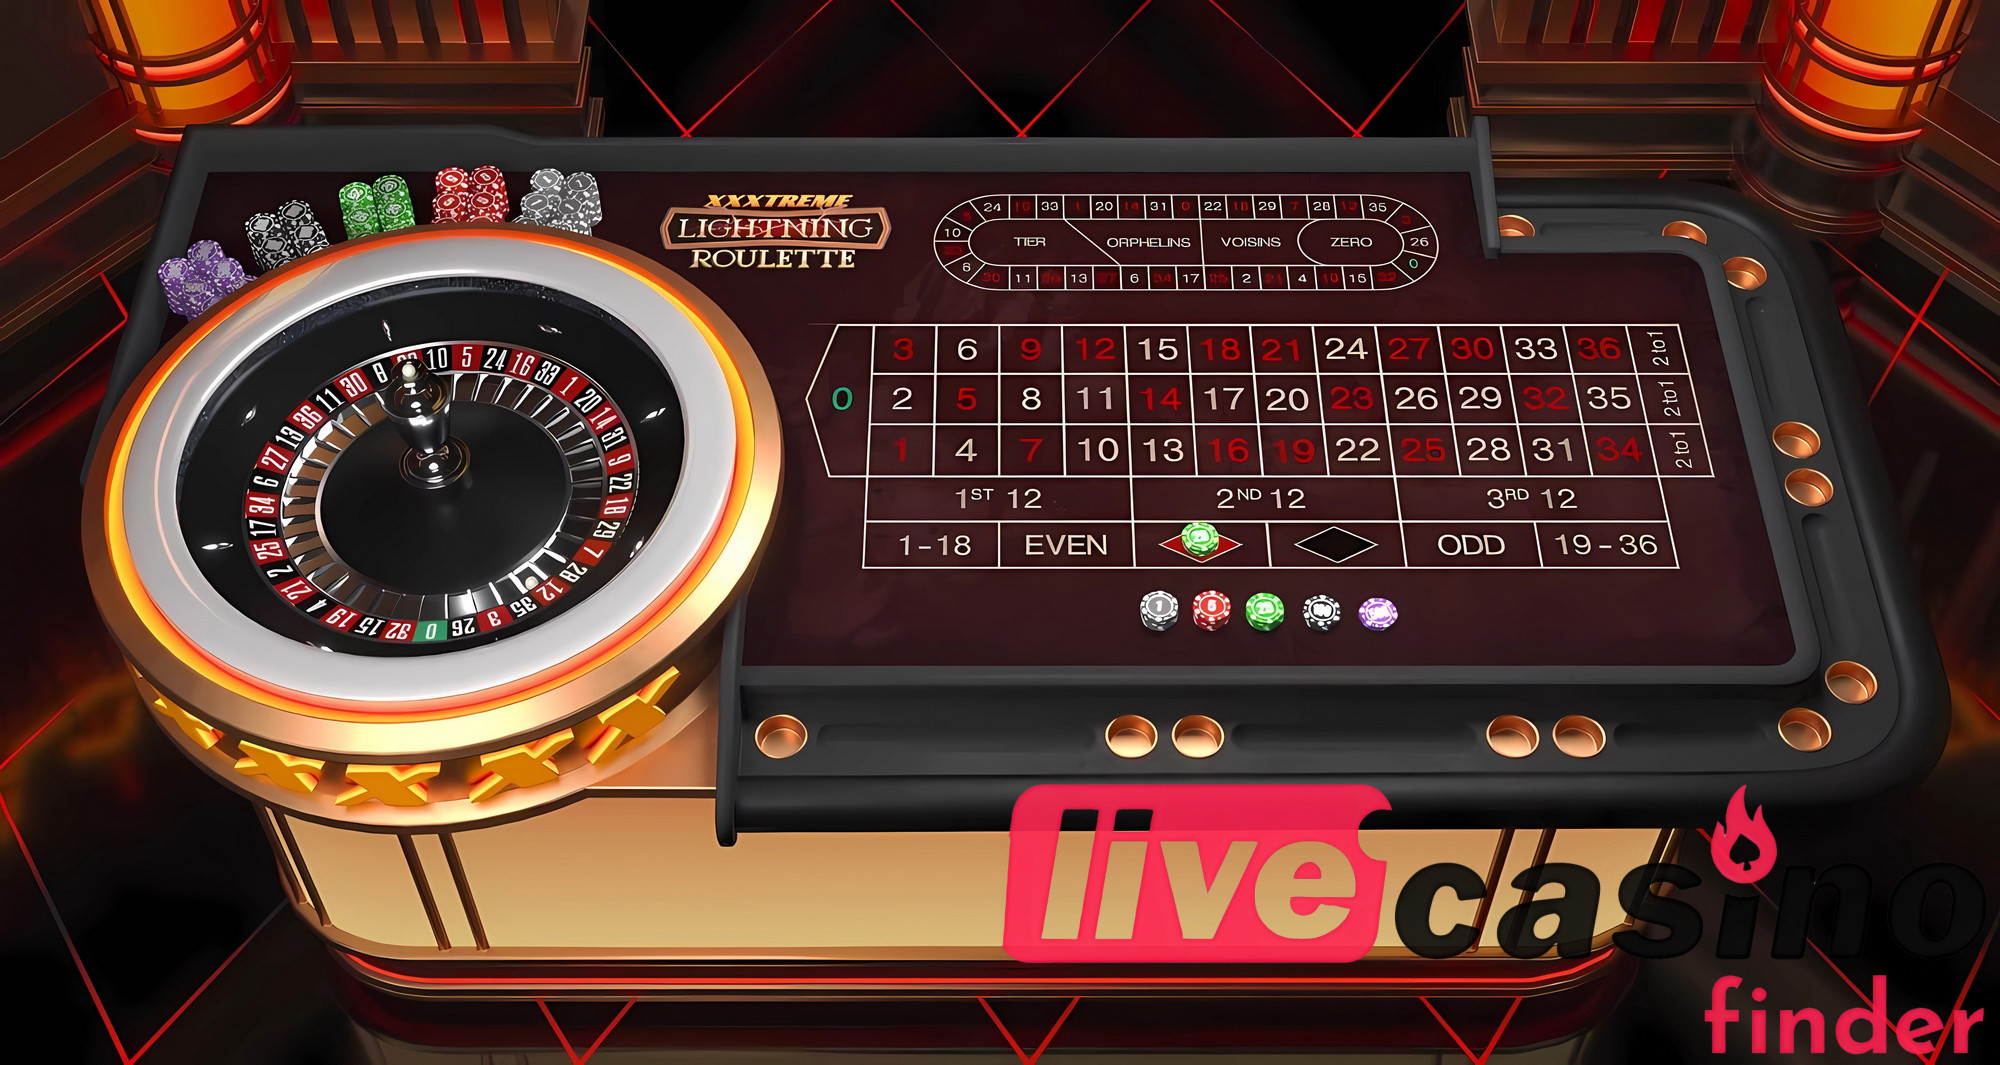 Live Casino Game XXXtreme Lightning Roulette.